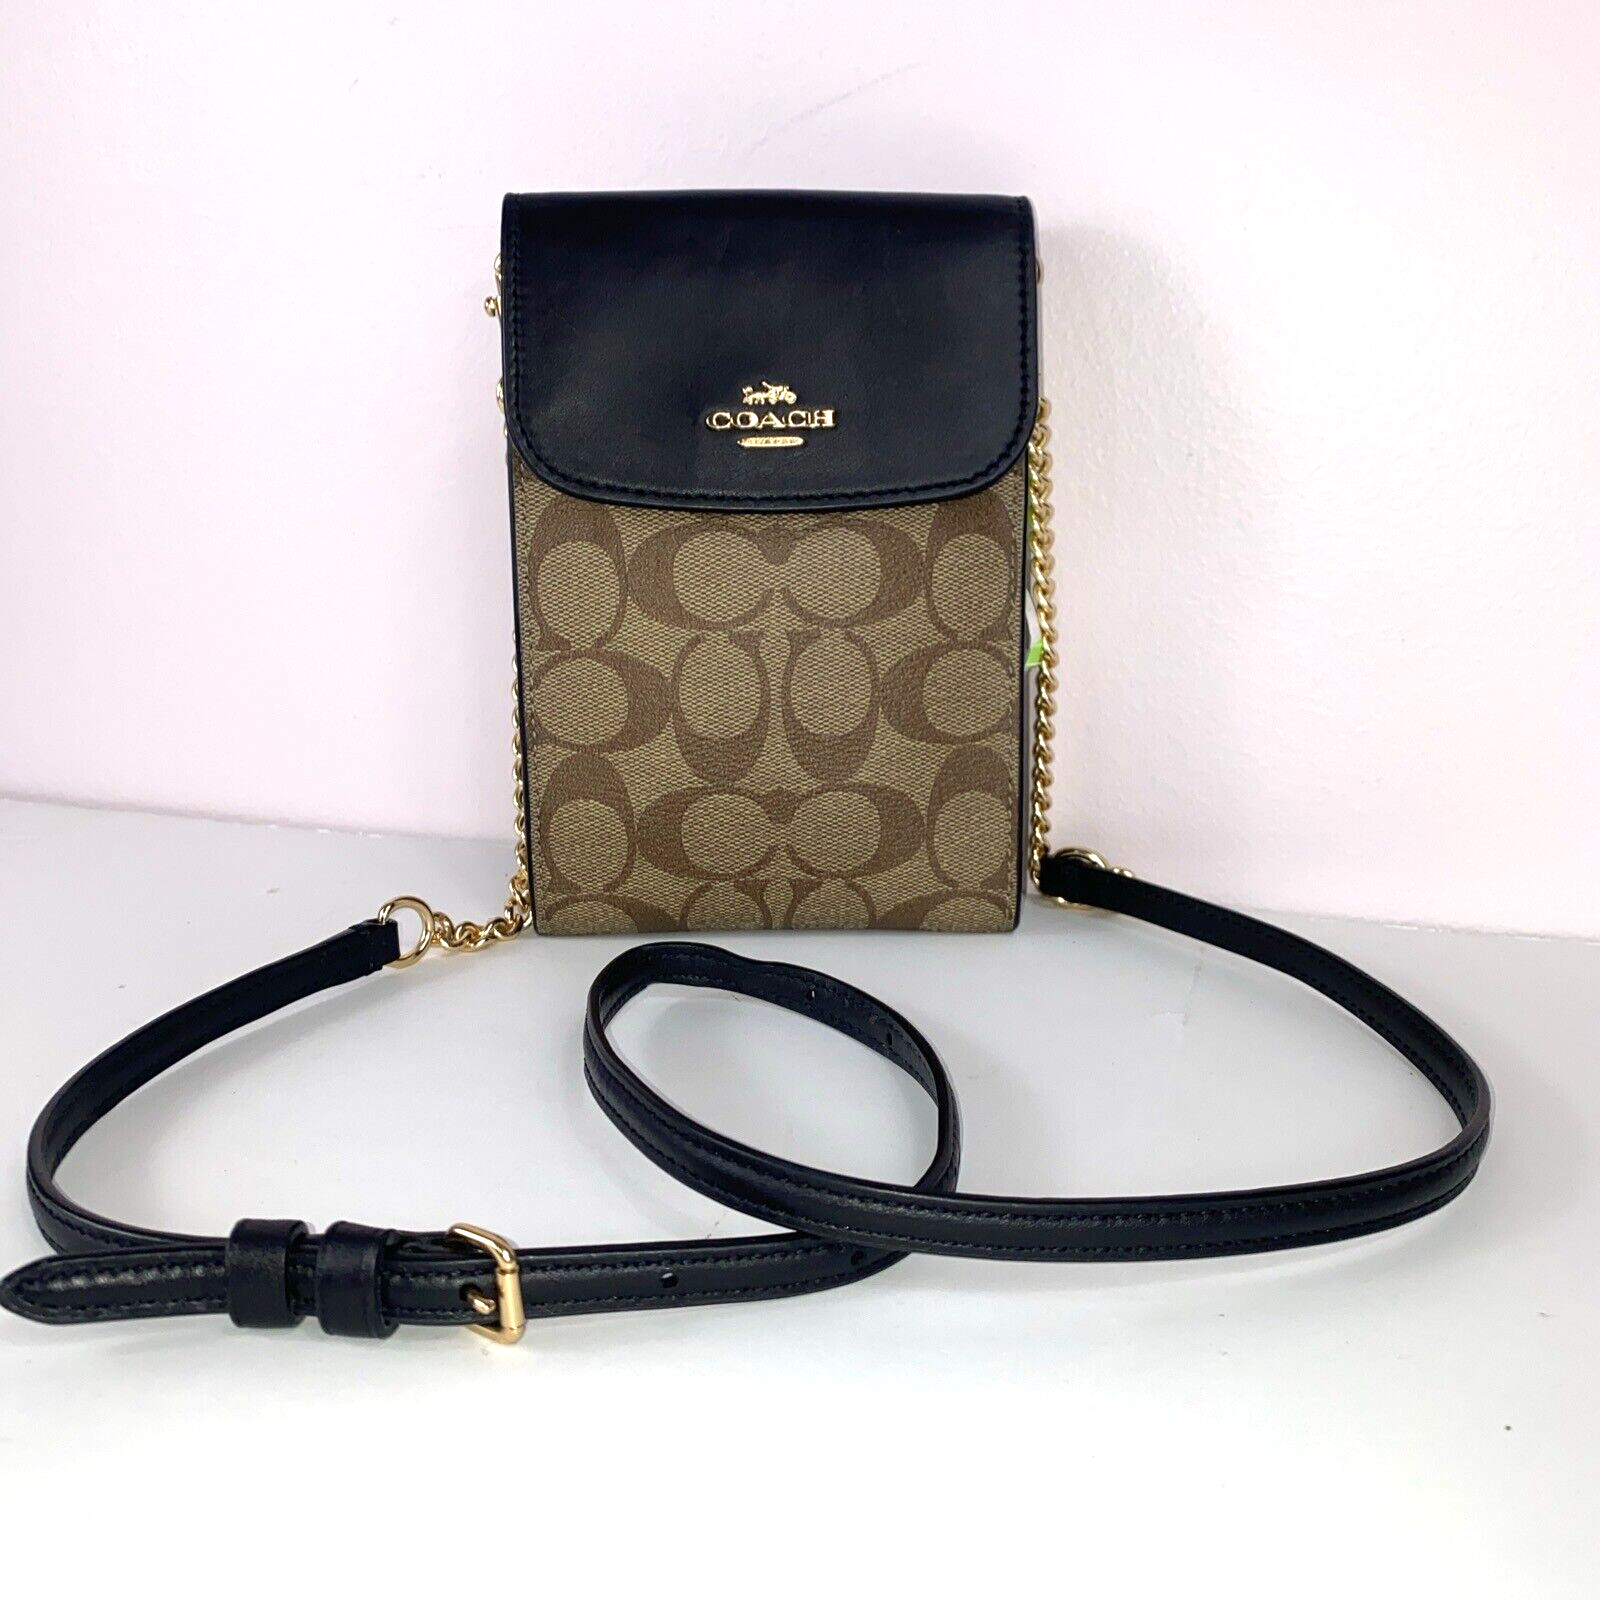 Primary image for Coach Signature Phone Crossbody Bag Rachael Brown Canvas Black Leather 3051 B21